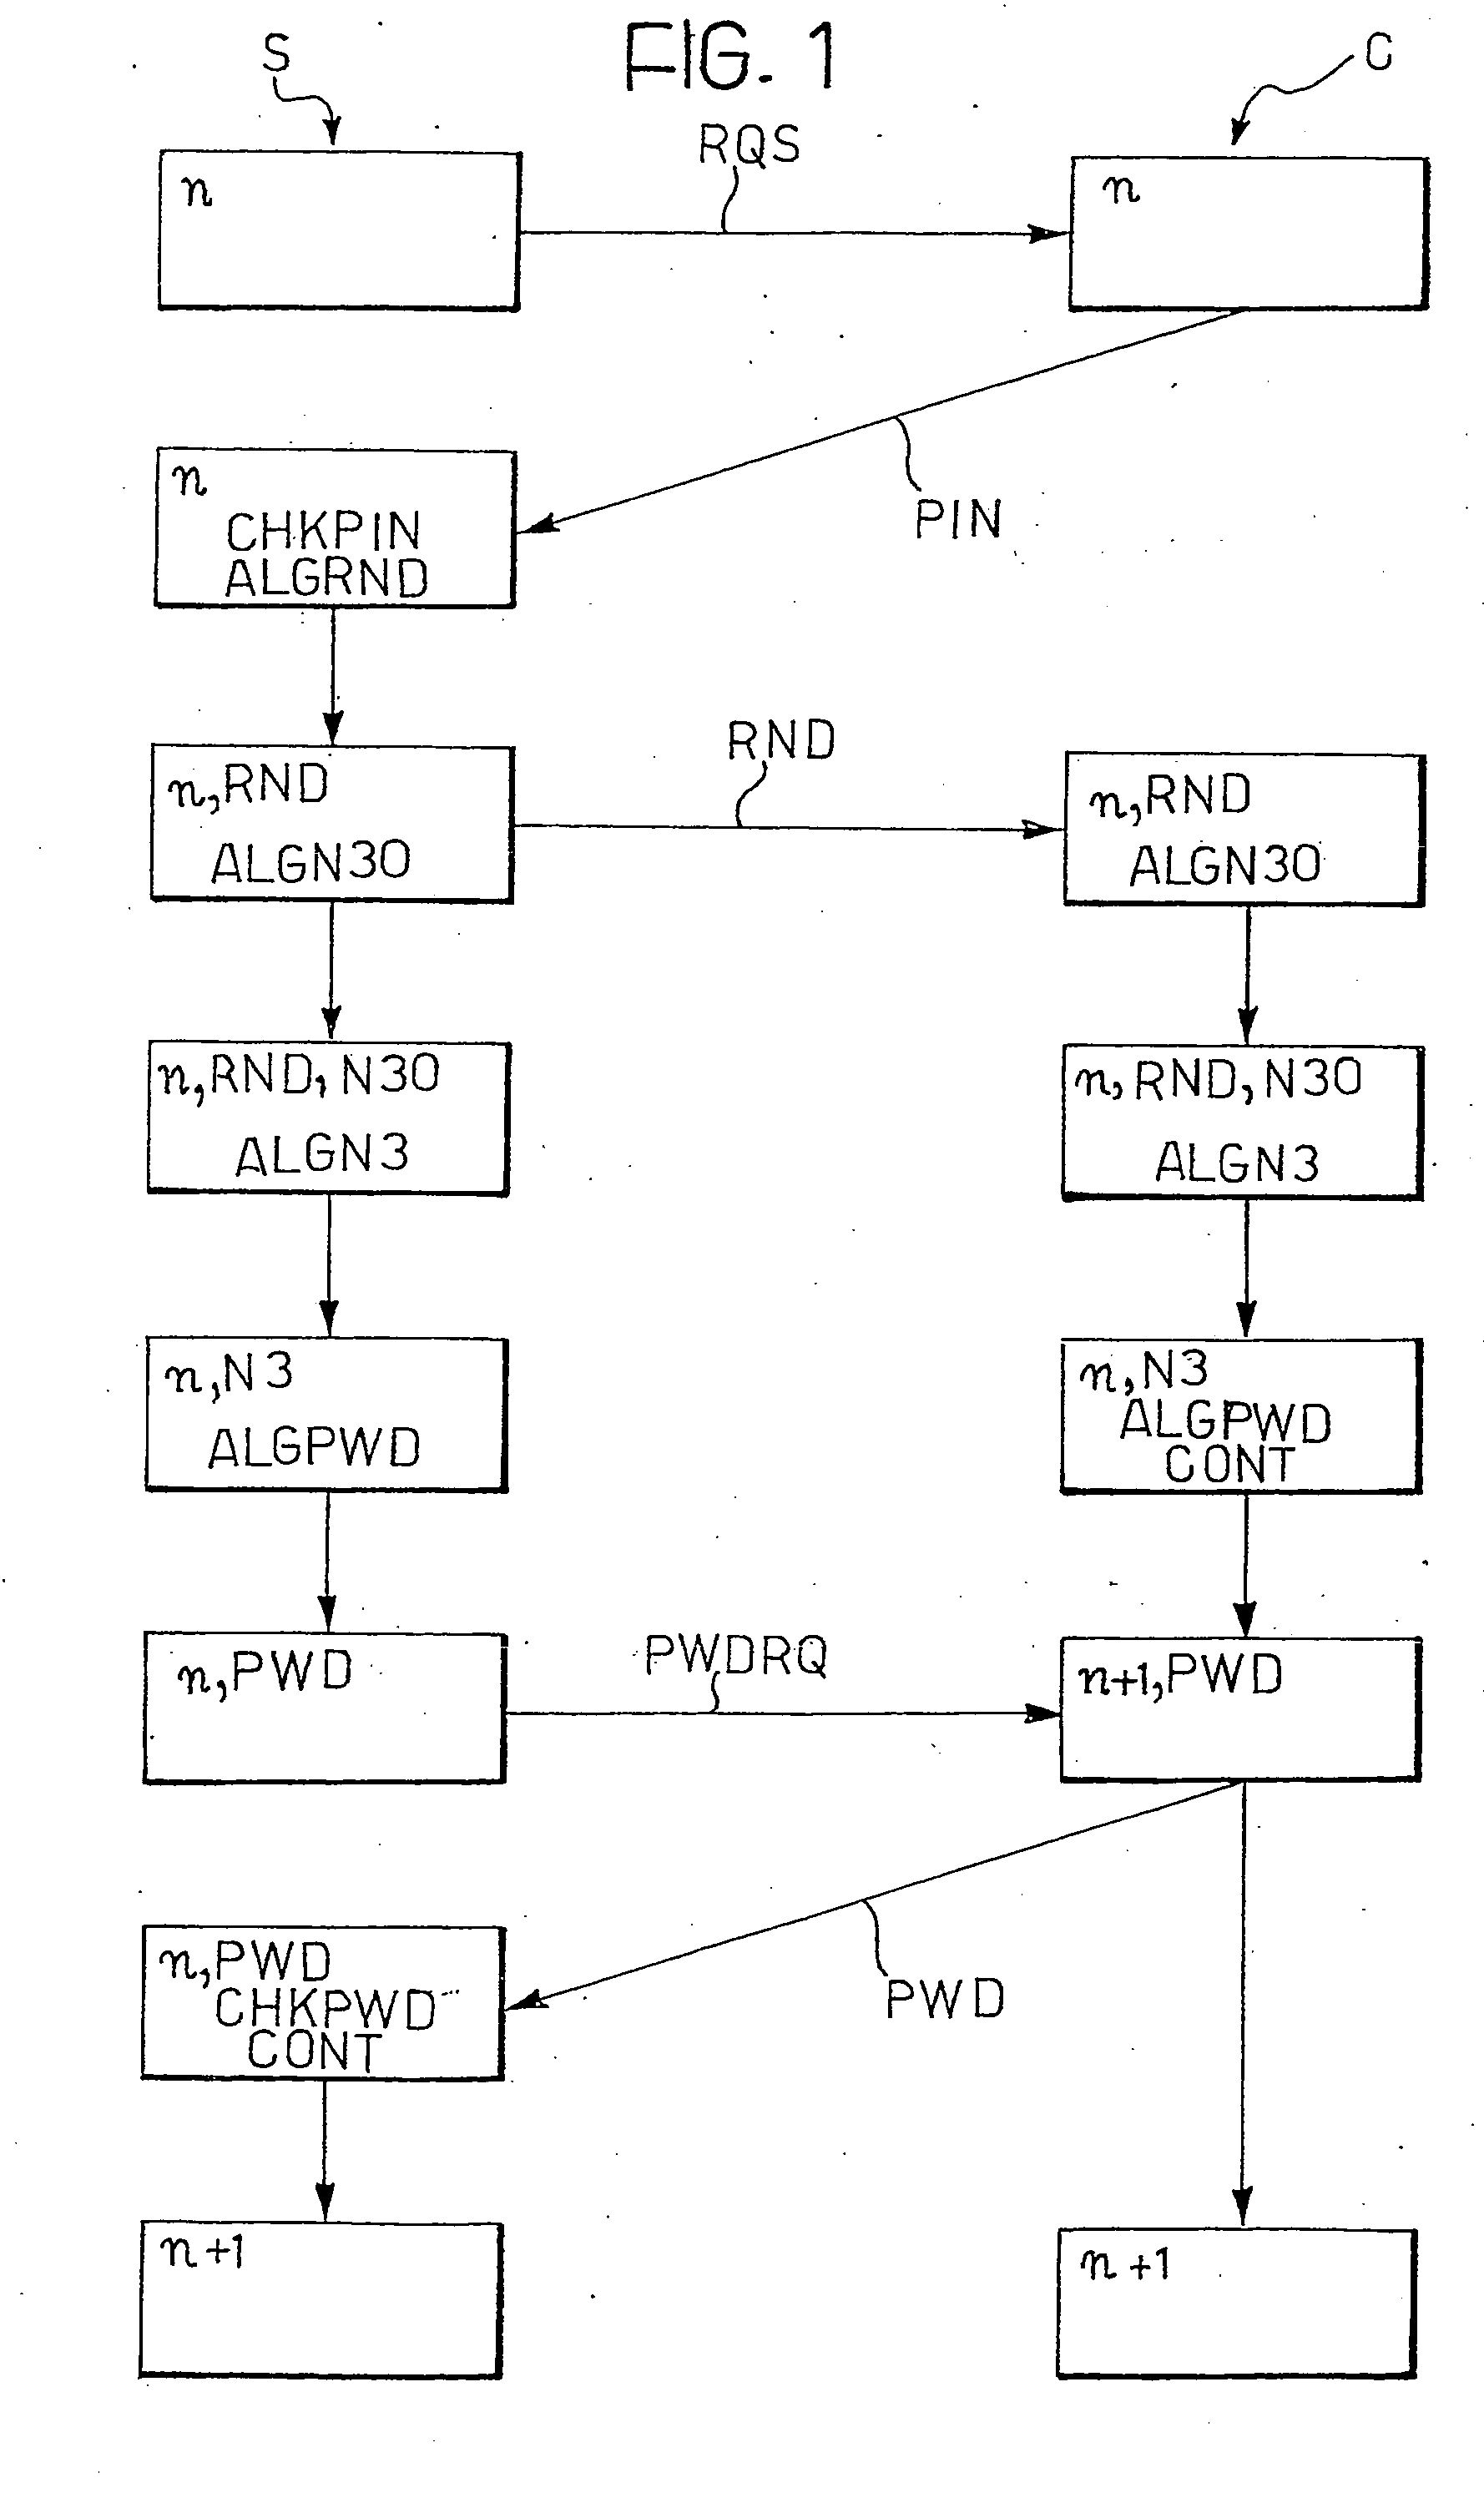 Method and system for identifying an authorized individual by means of unpredictable single-use passwords